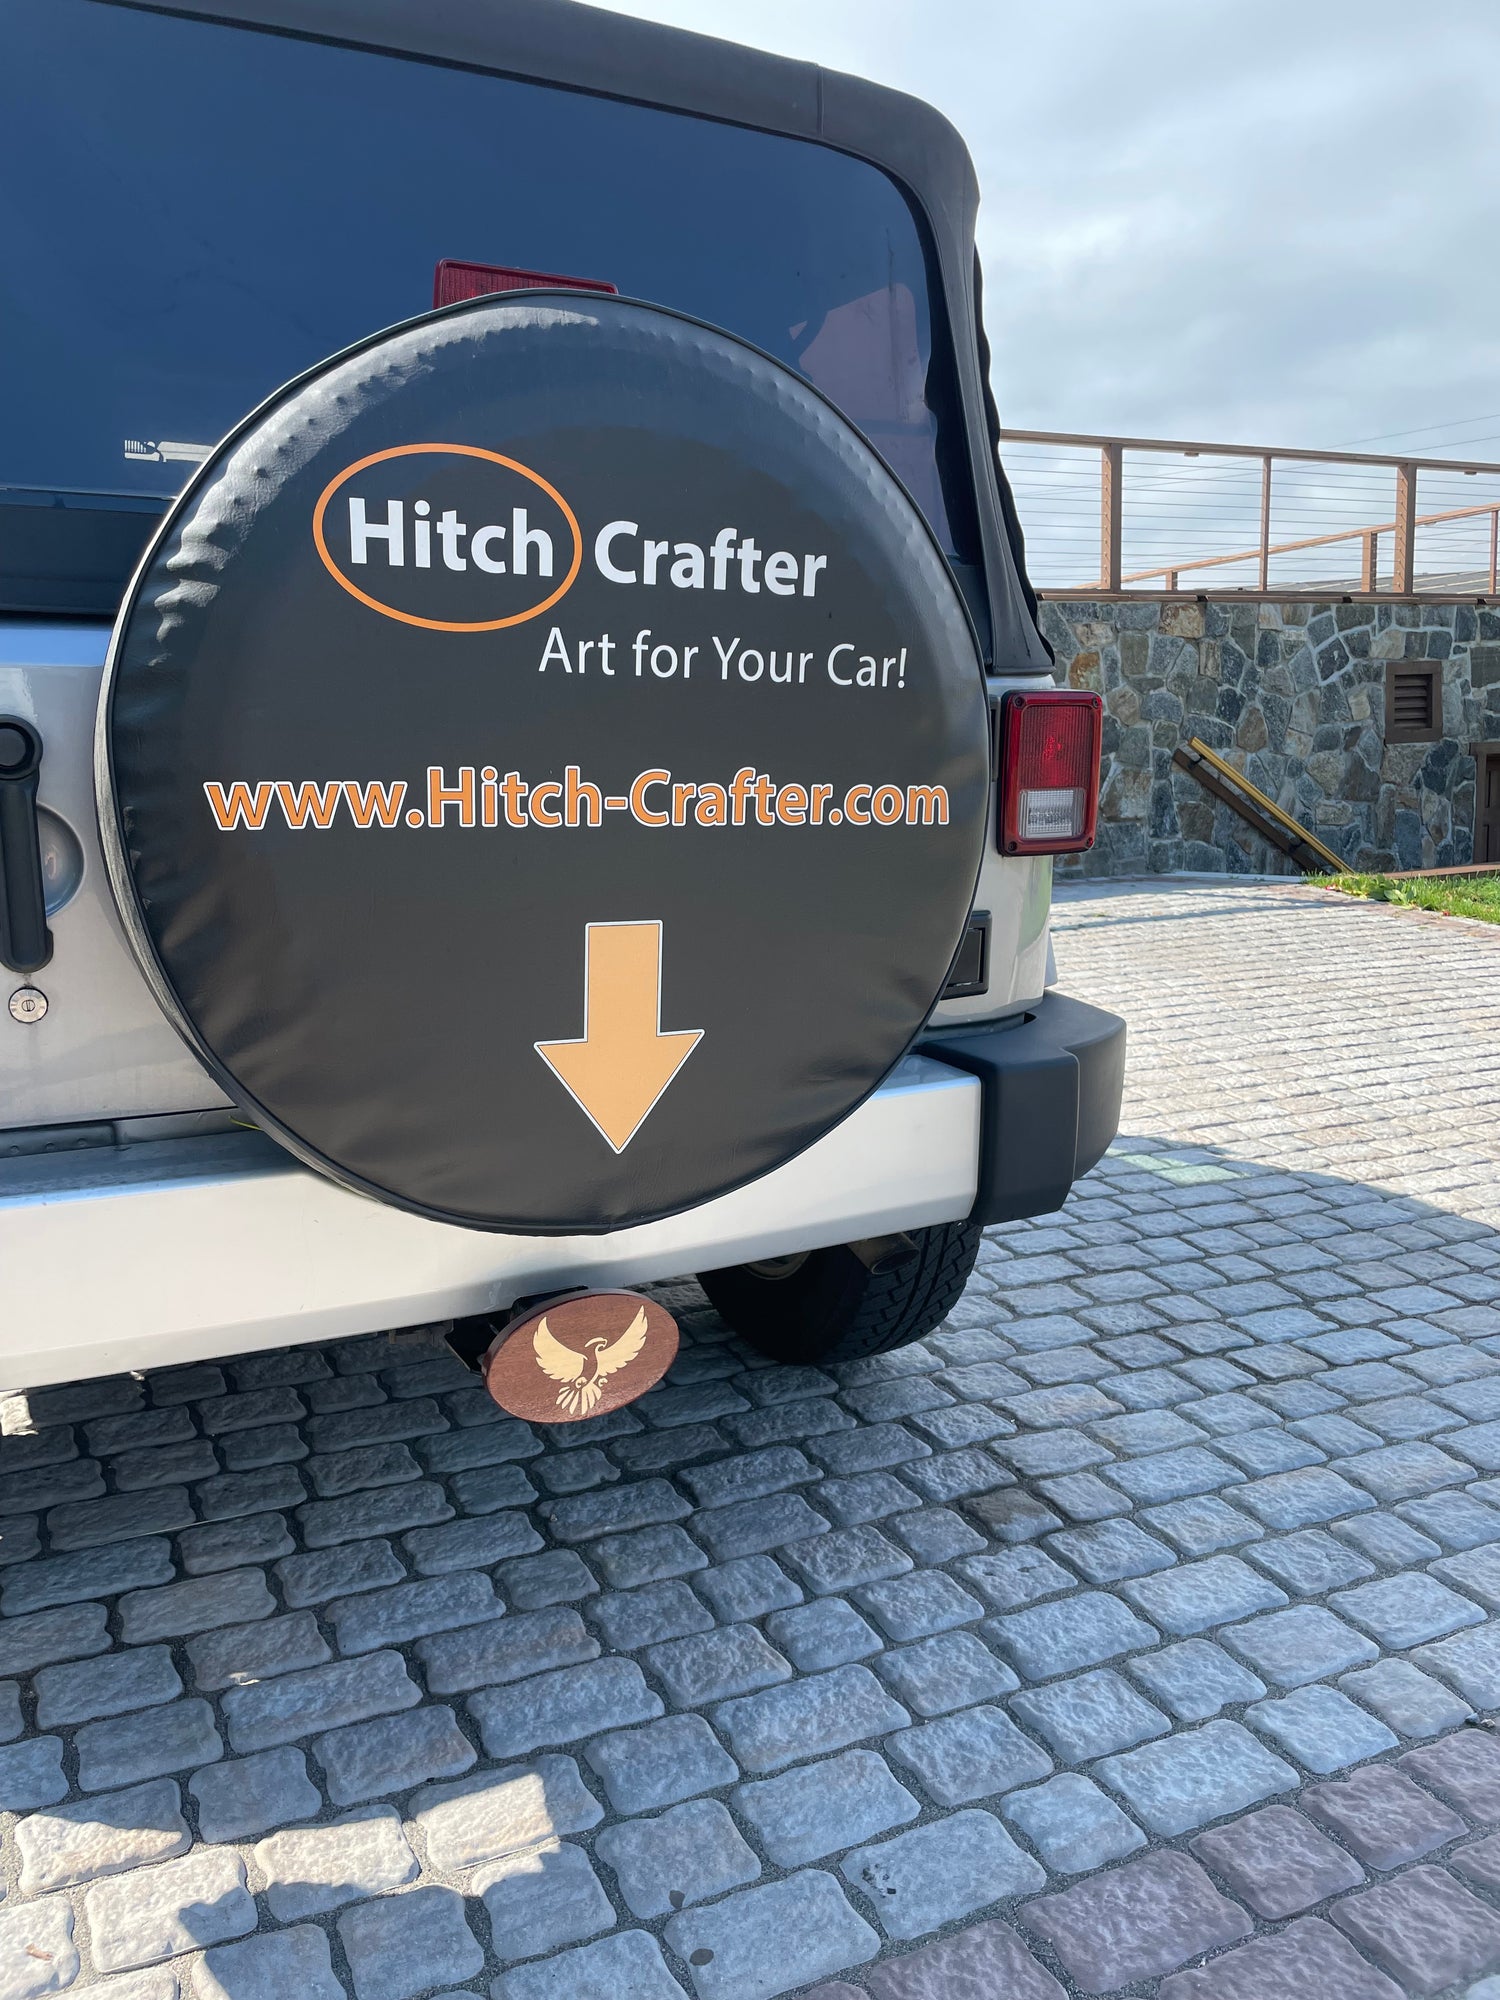 The Hitch-Crafter Collection